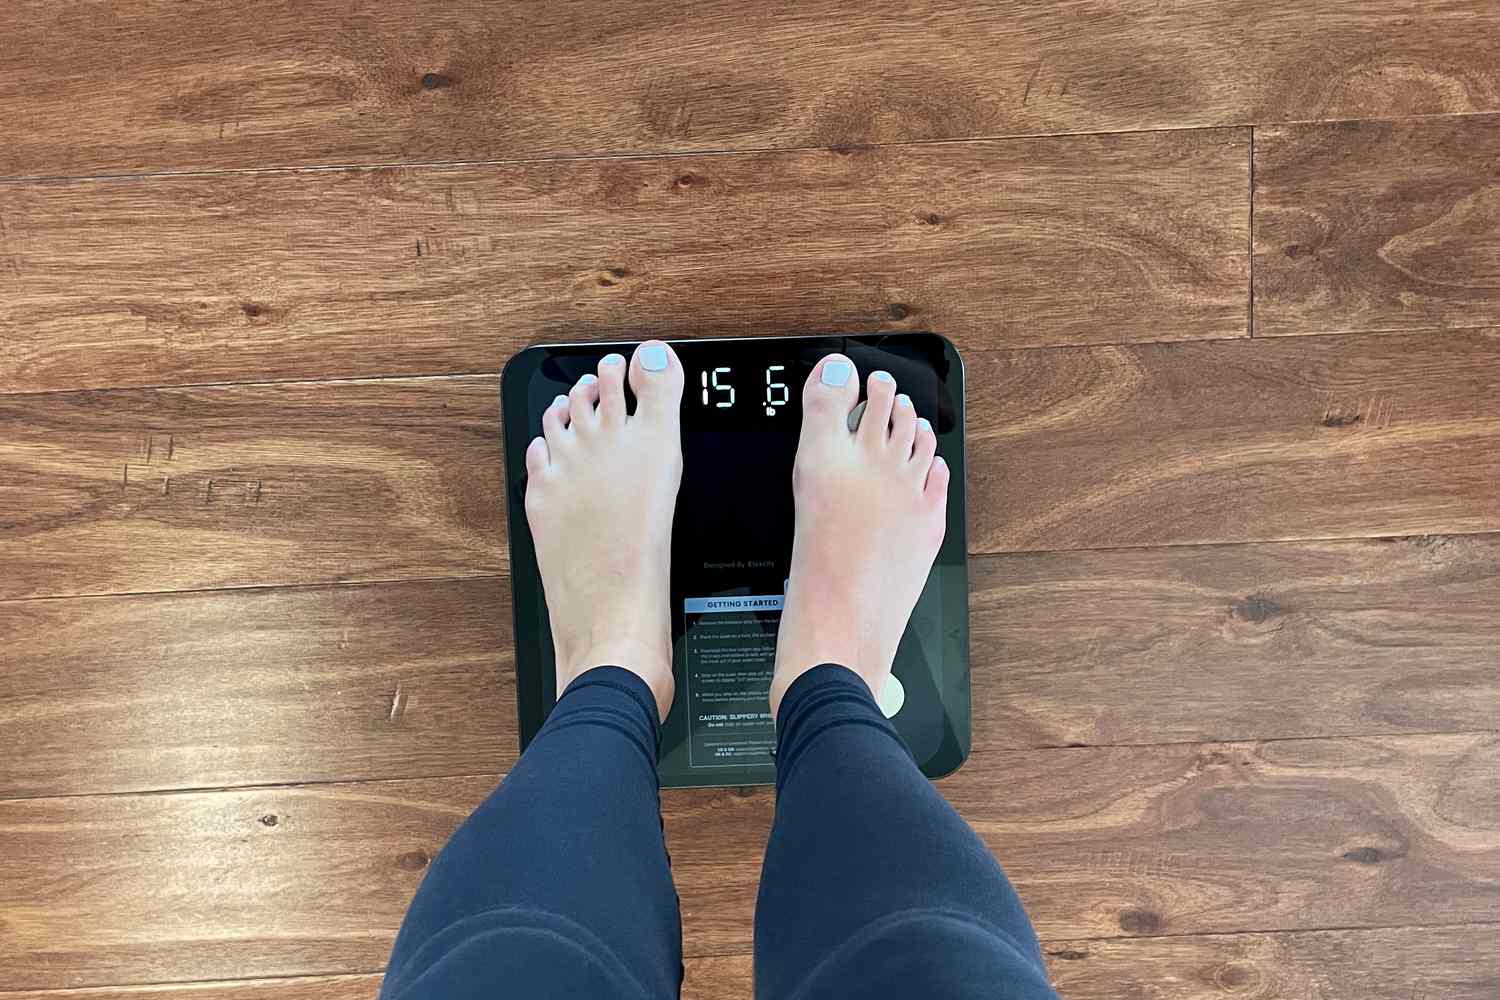 Why My Weight Scale Gives Different Readings